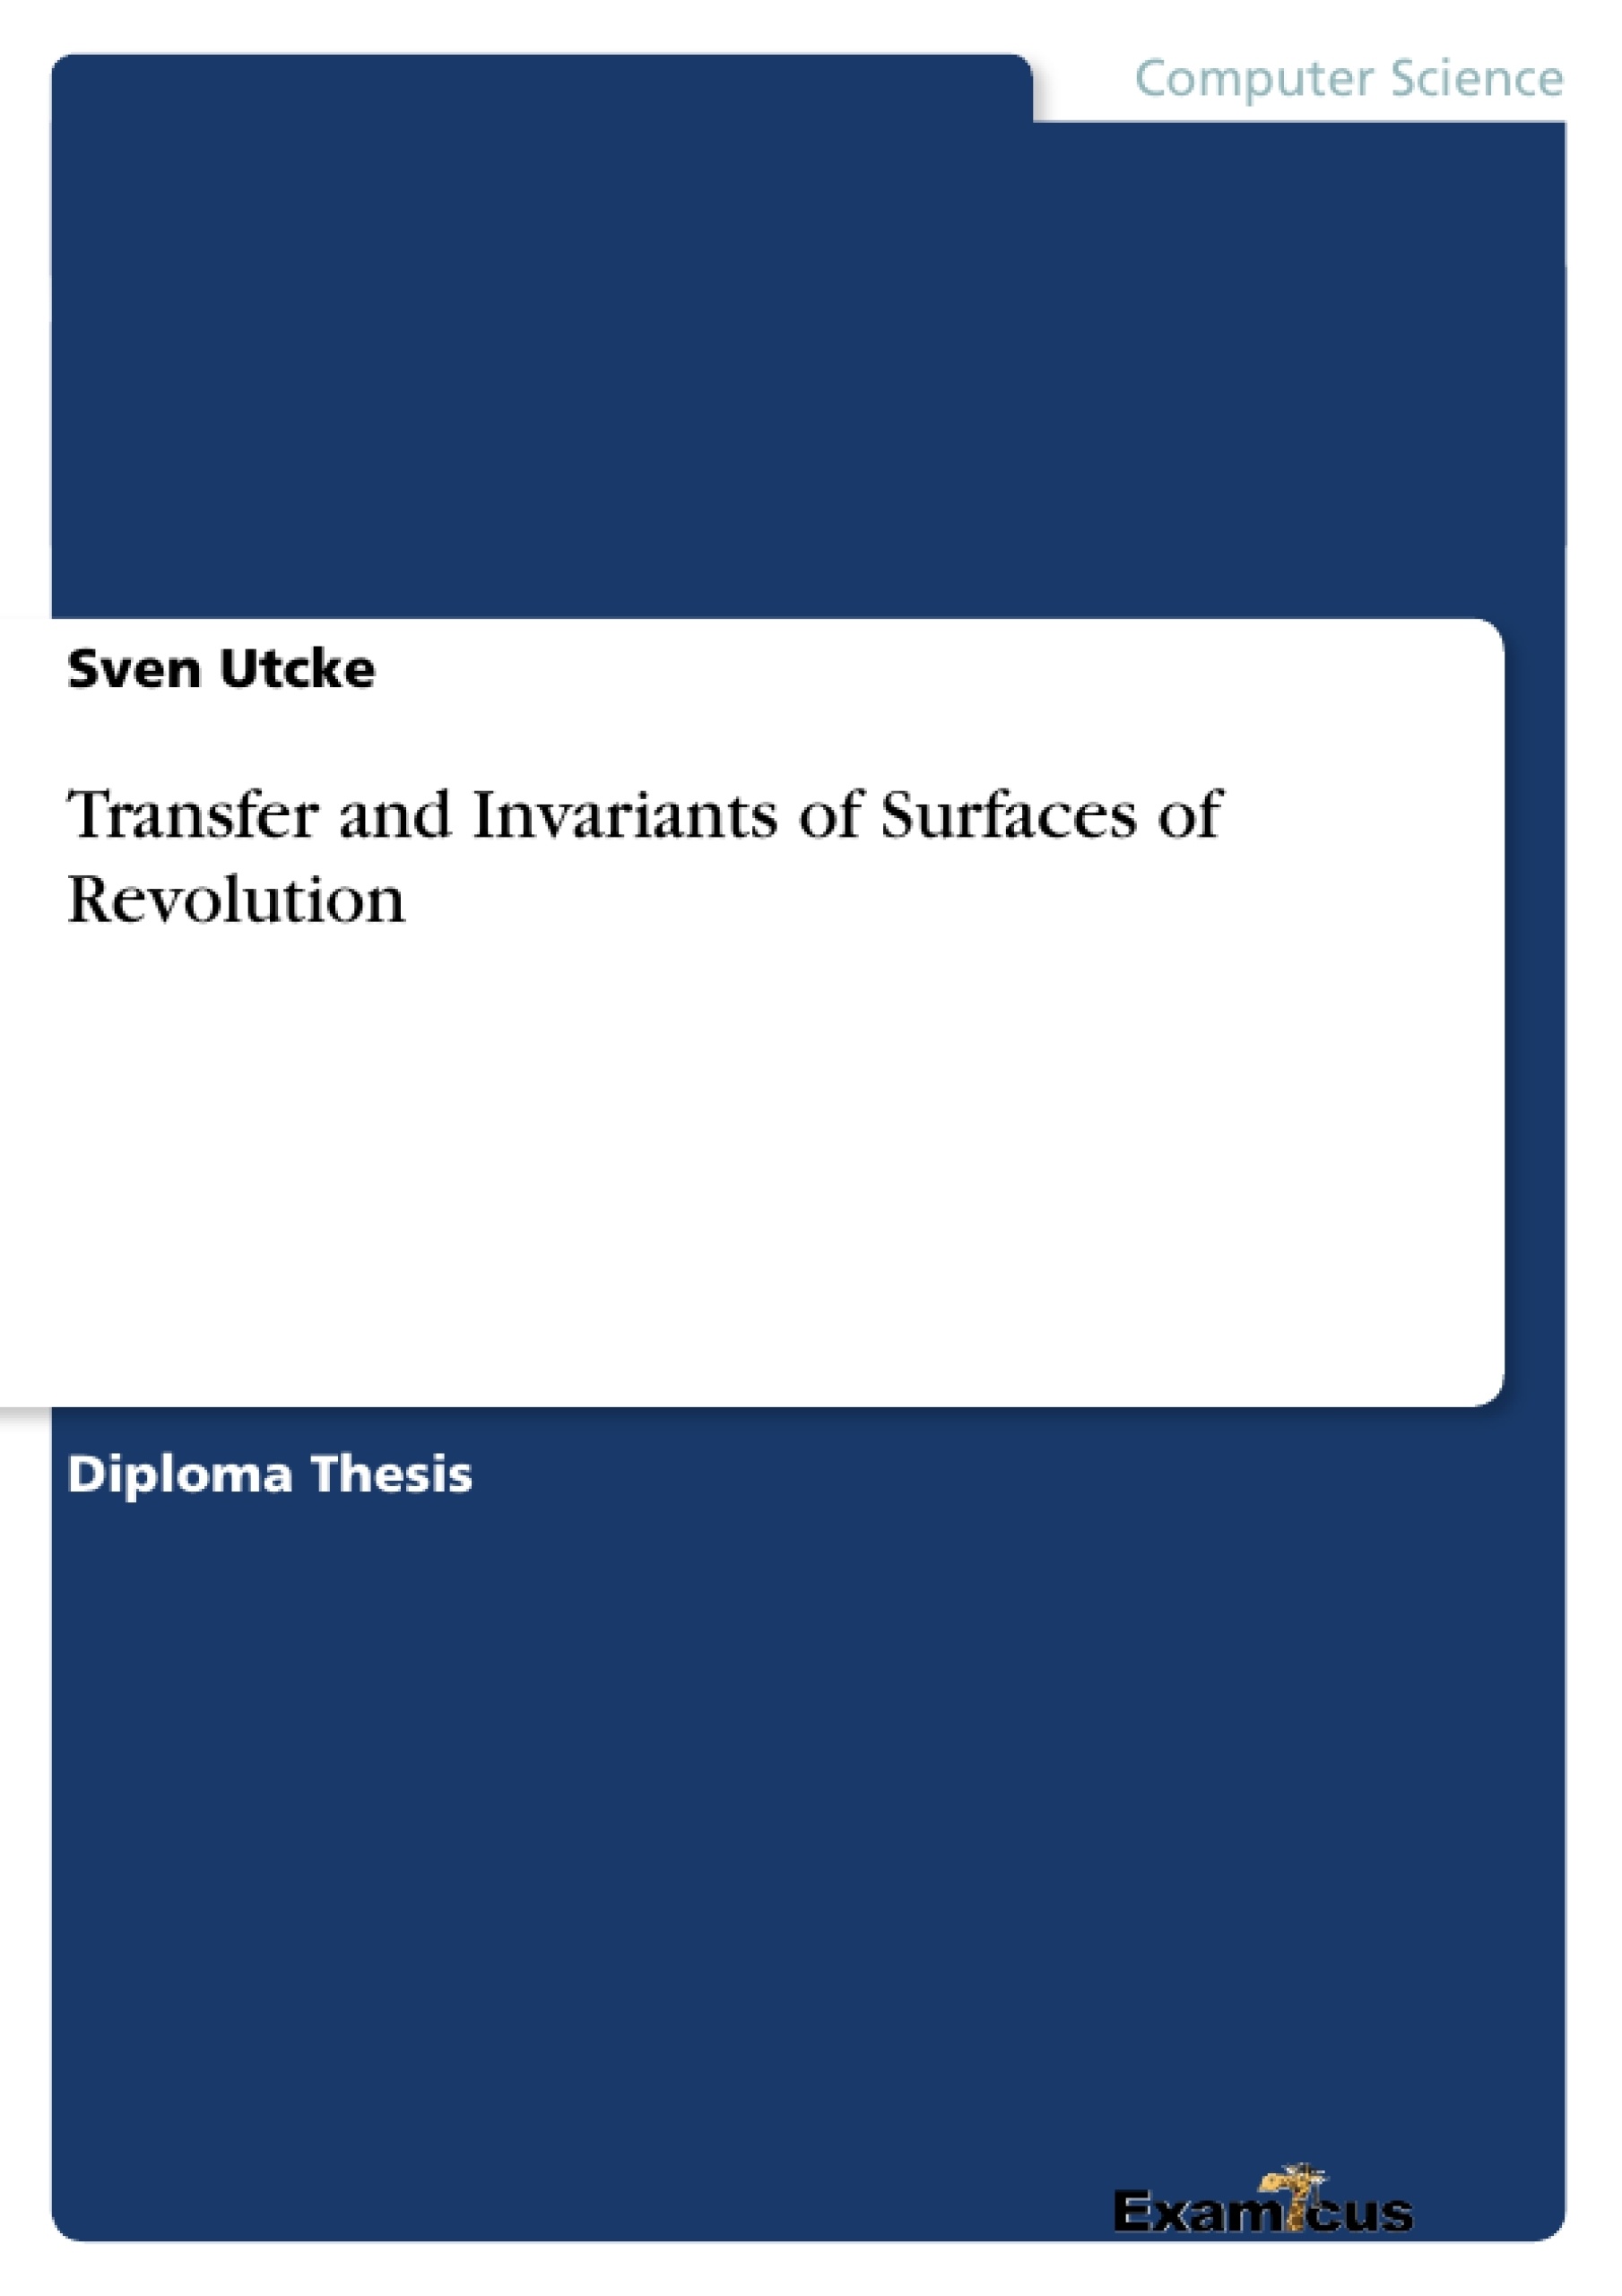 Title: Transfer and Invariants of Surfaces of Revolution